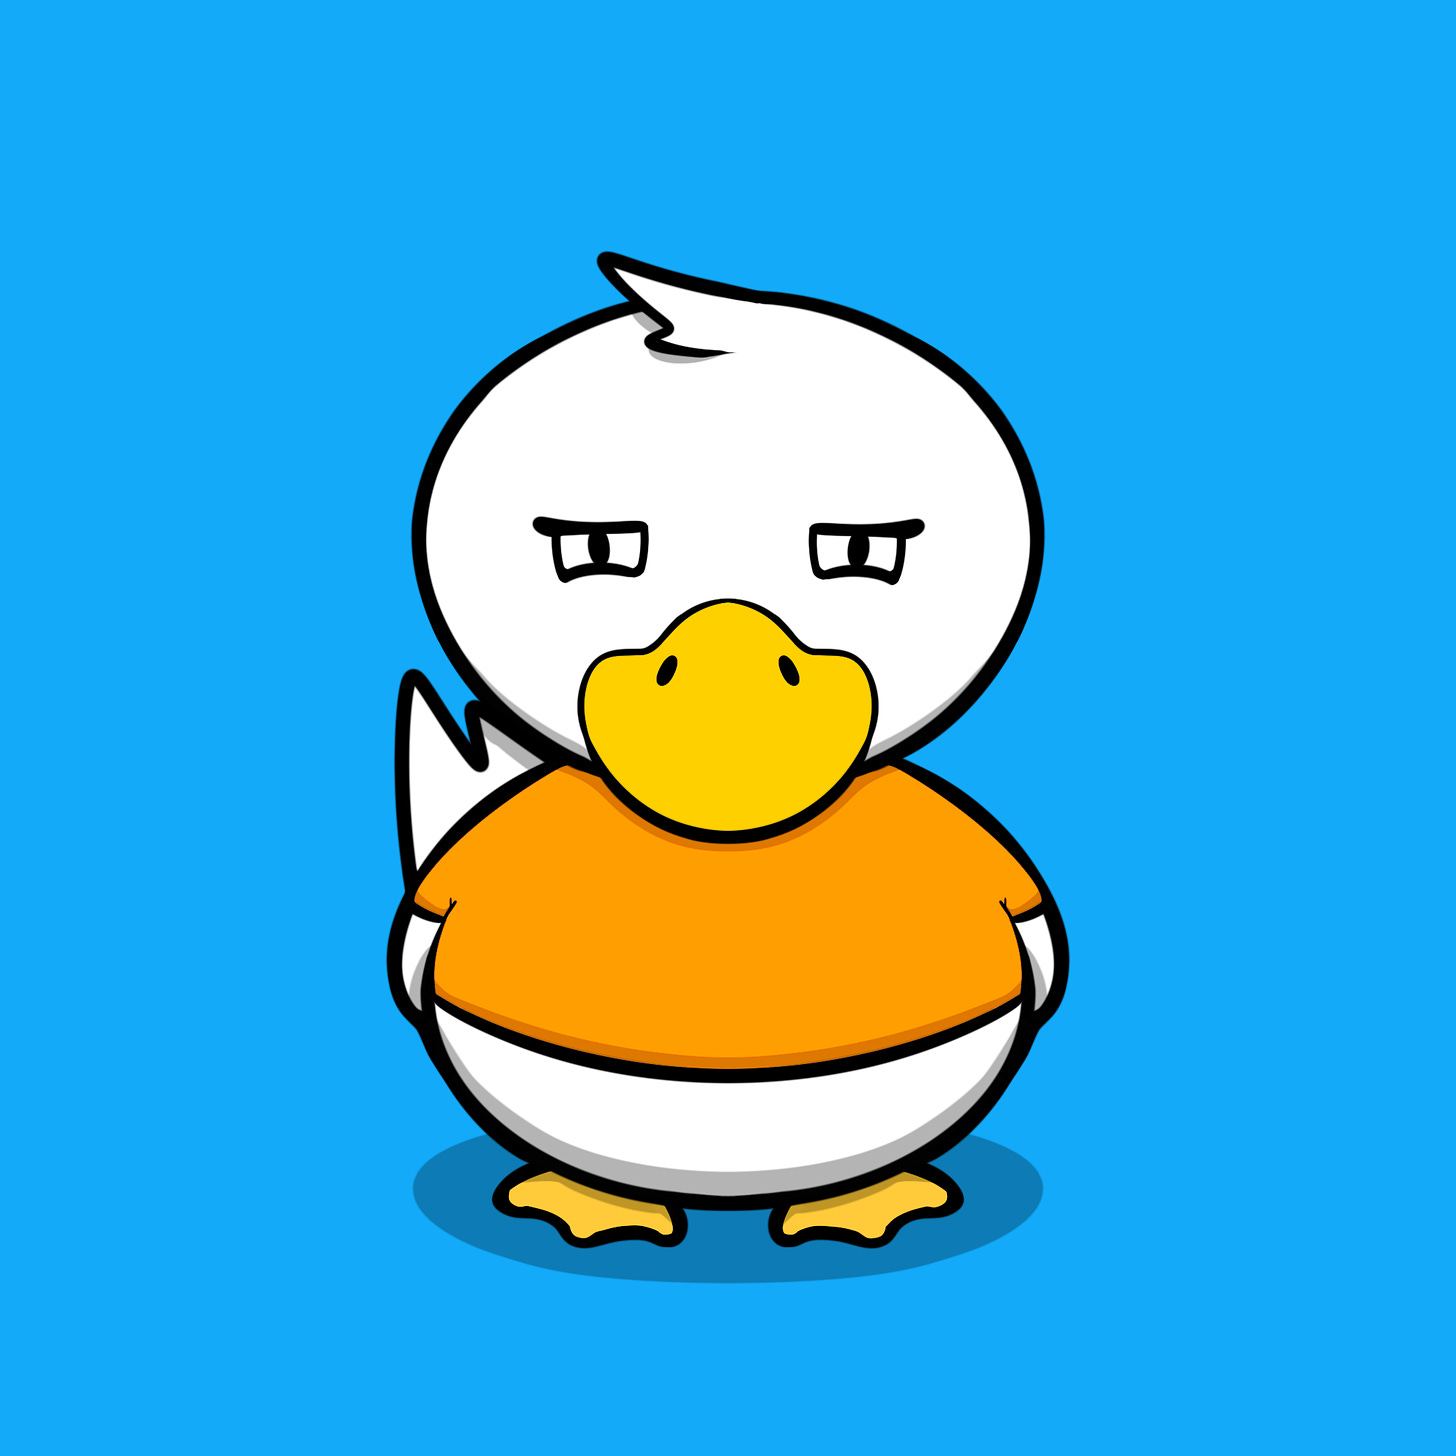 A duck with an orange shirt on a blue background.